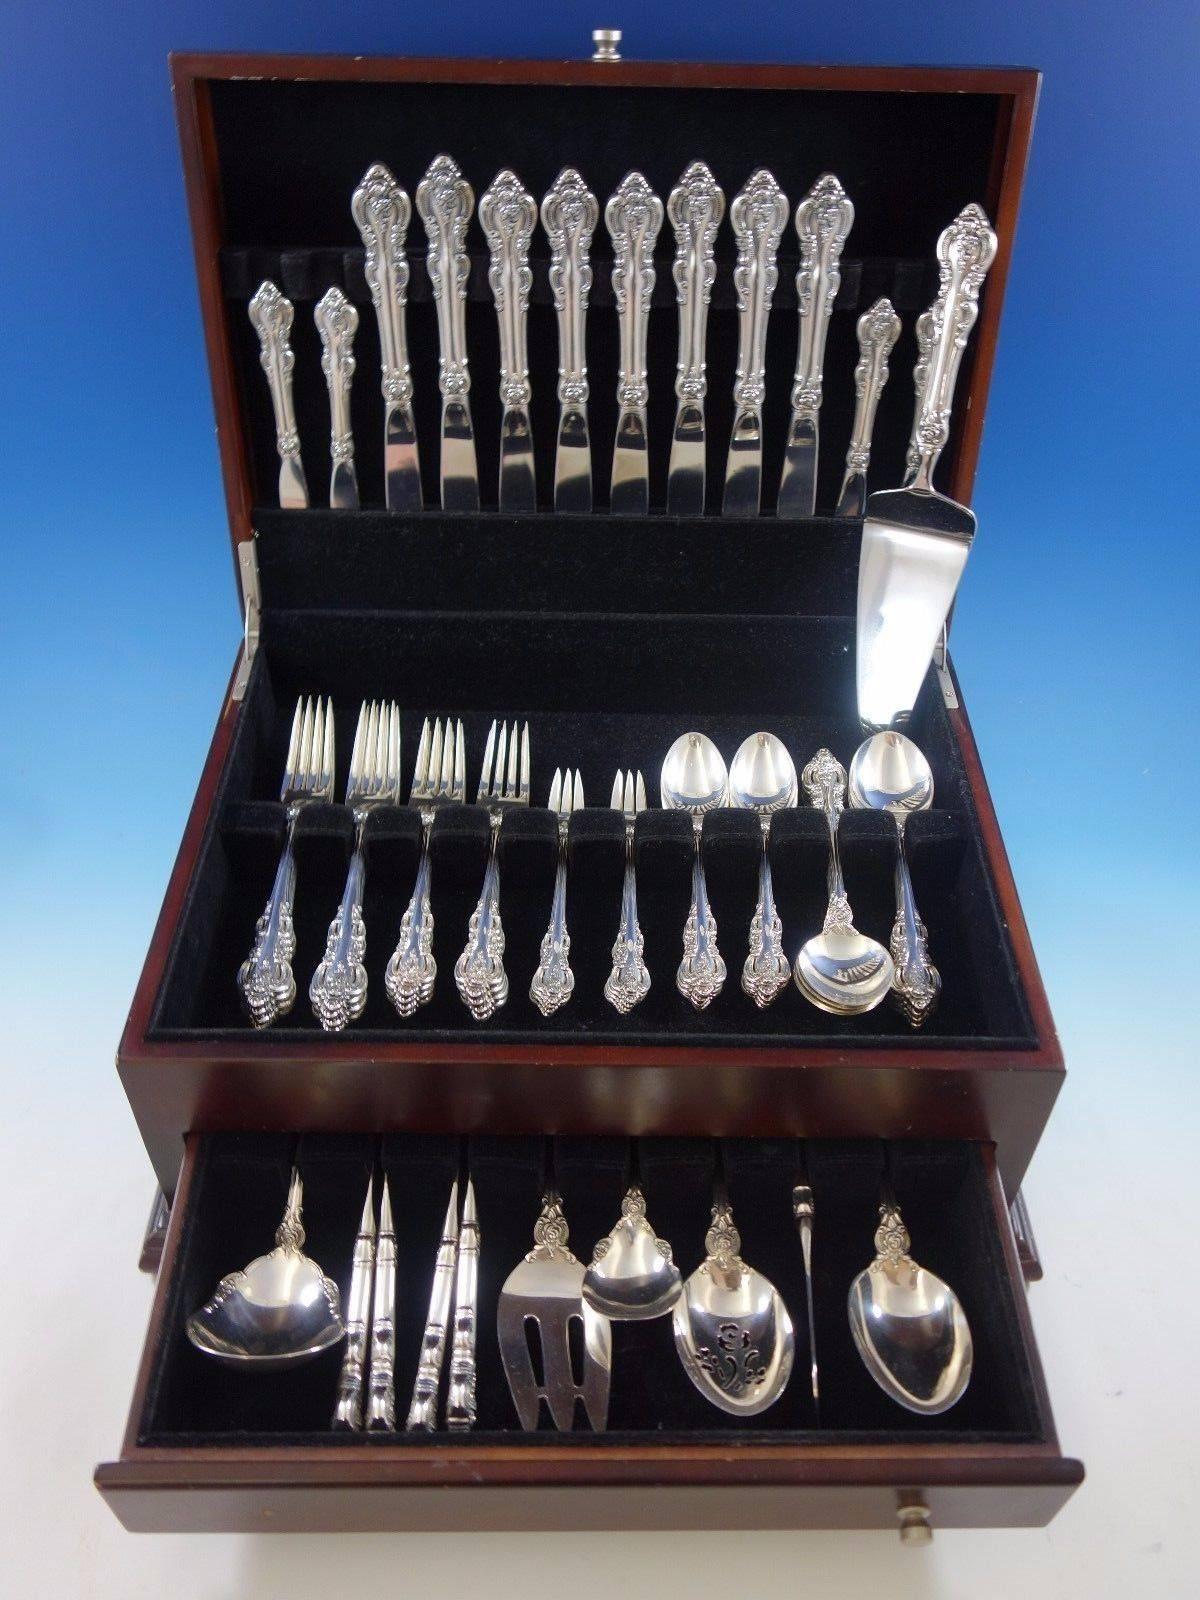 El Grandee by Towle sterling silver flatware set, 63 pieces. This set includes:

Eight knives, 9